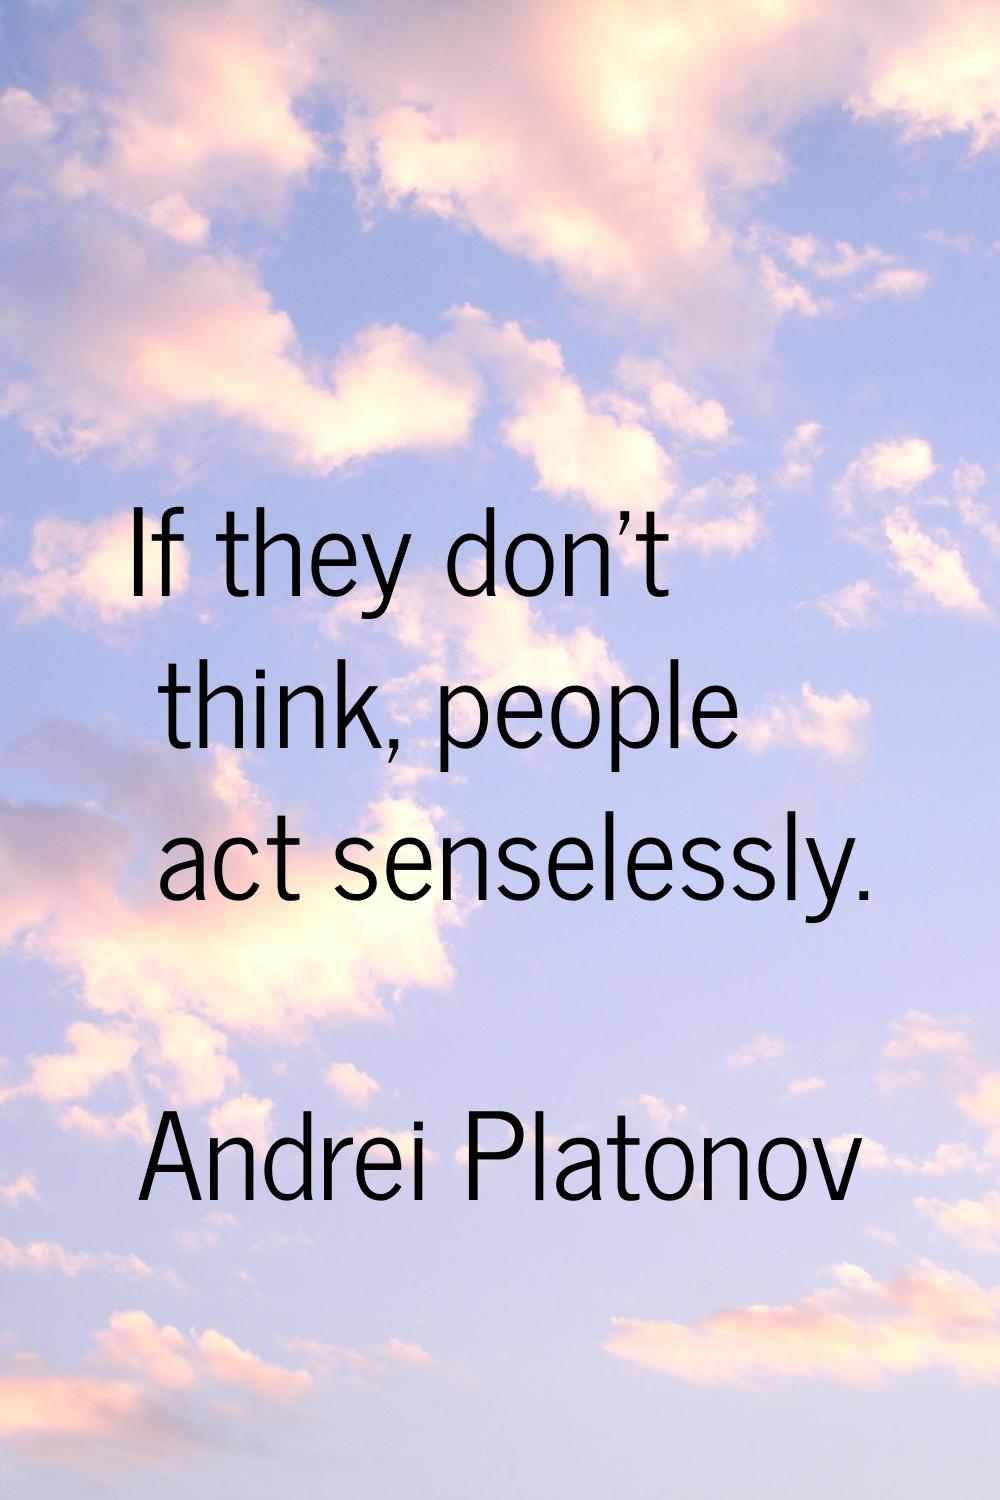 If they don't think, people act senselessly.